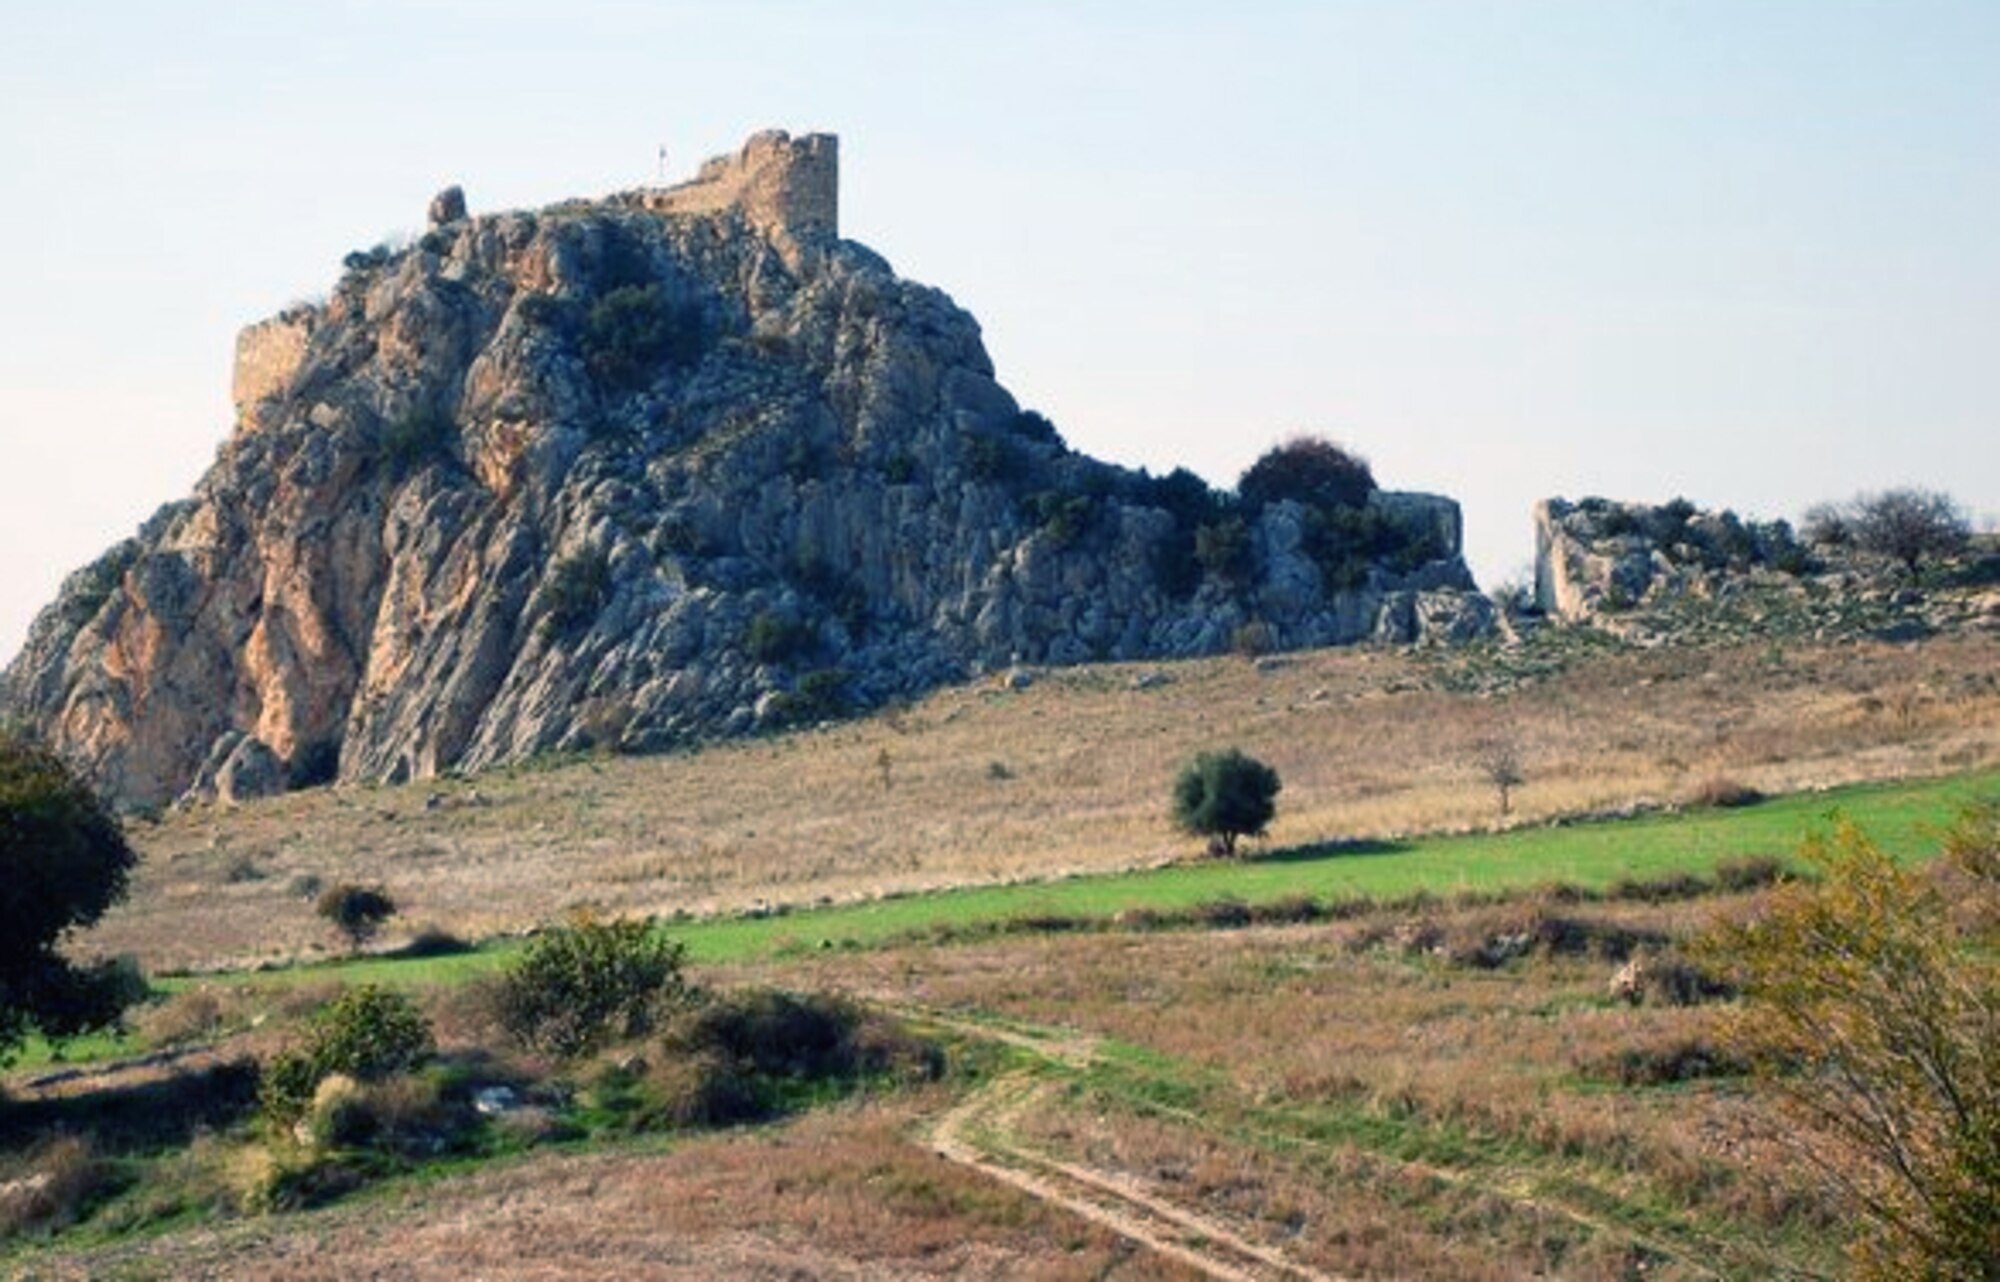 The back side of the castle and stone-walled gate is visible Saturday, Nov. 28, 2009, from the back side of the Hieropolis Castabala site. Hieropolis is known for Darius of Persia passing through in 333 B.C., its real permanence in history was 300 years later when it was the capital of an independent kingdom under Tarcondimotus. Tarcondimotus sided with Pompeii against Caesar and was killed in 31B.C. at the battle of Actium where the fleet of Marc Antony and Cleopatra was defeated. (U.S. Air Force photo/Senior Airman Sara Csurilla)